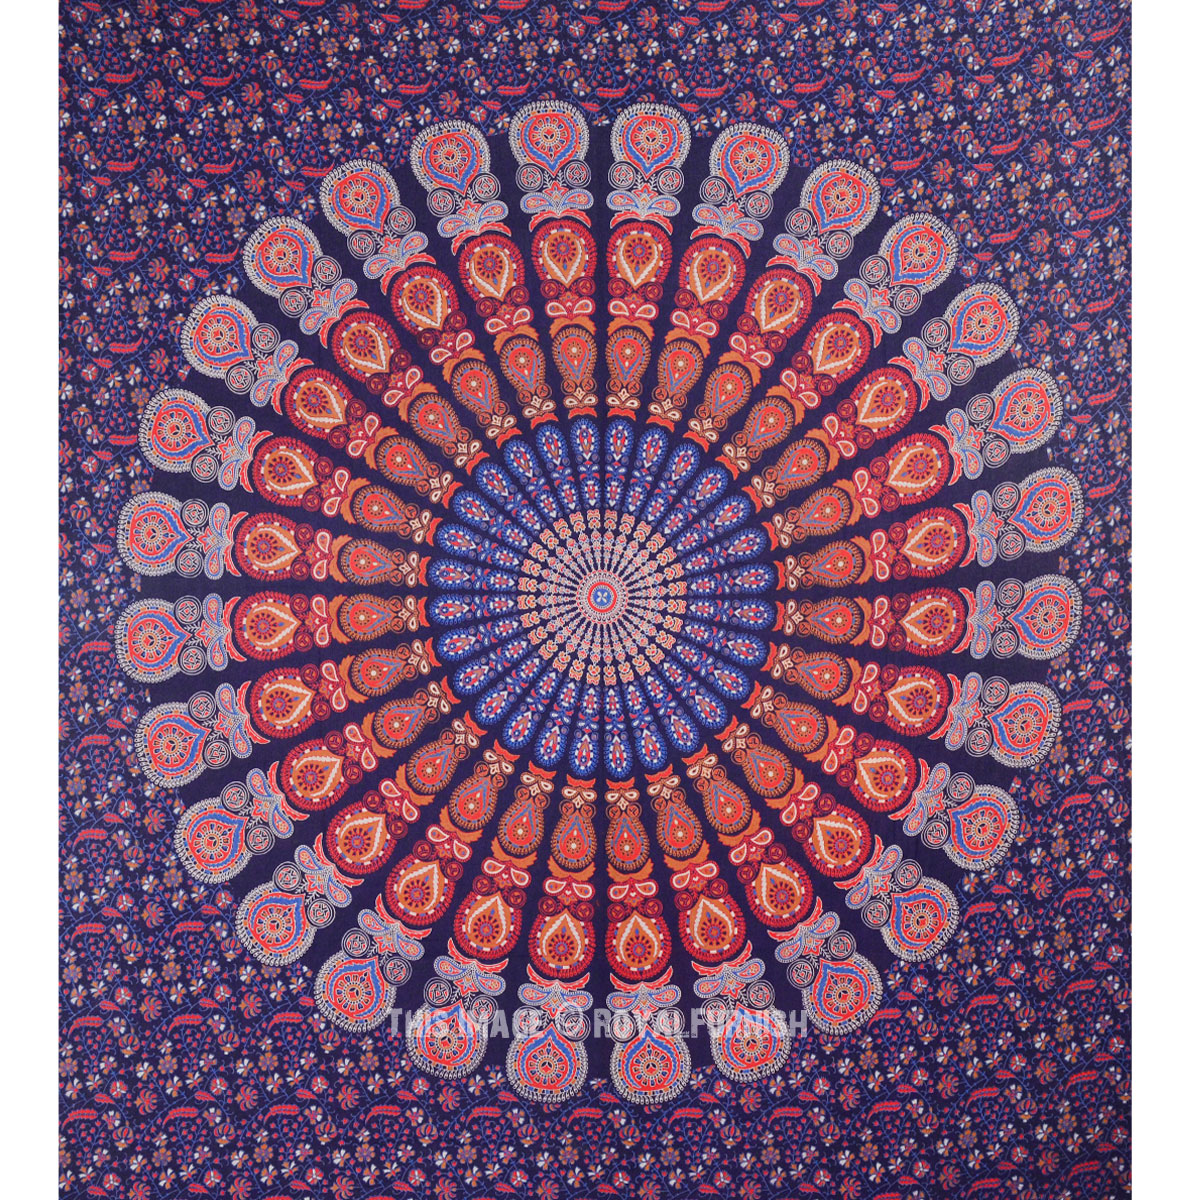 Details about   Indian Peacock Mandala Tapestry Bohemian Beach Throw Yoga Mat Pompom Blanket 72" 